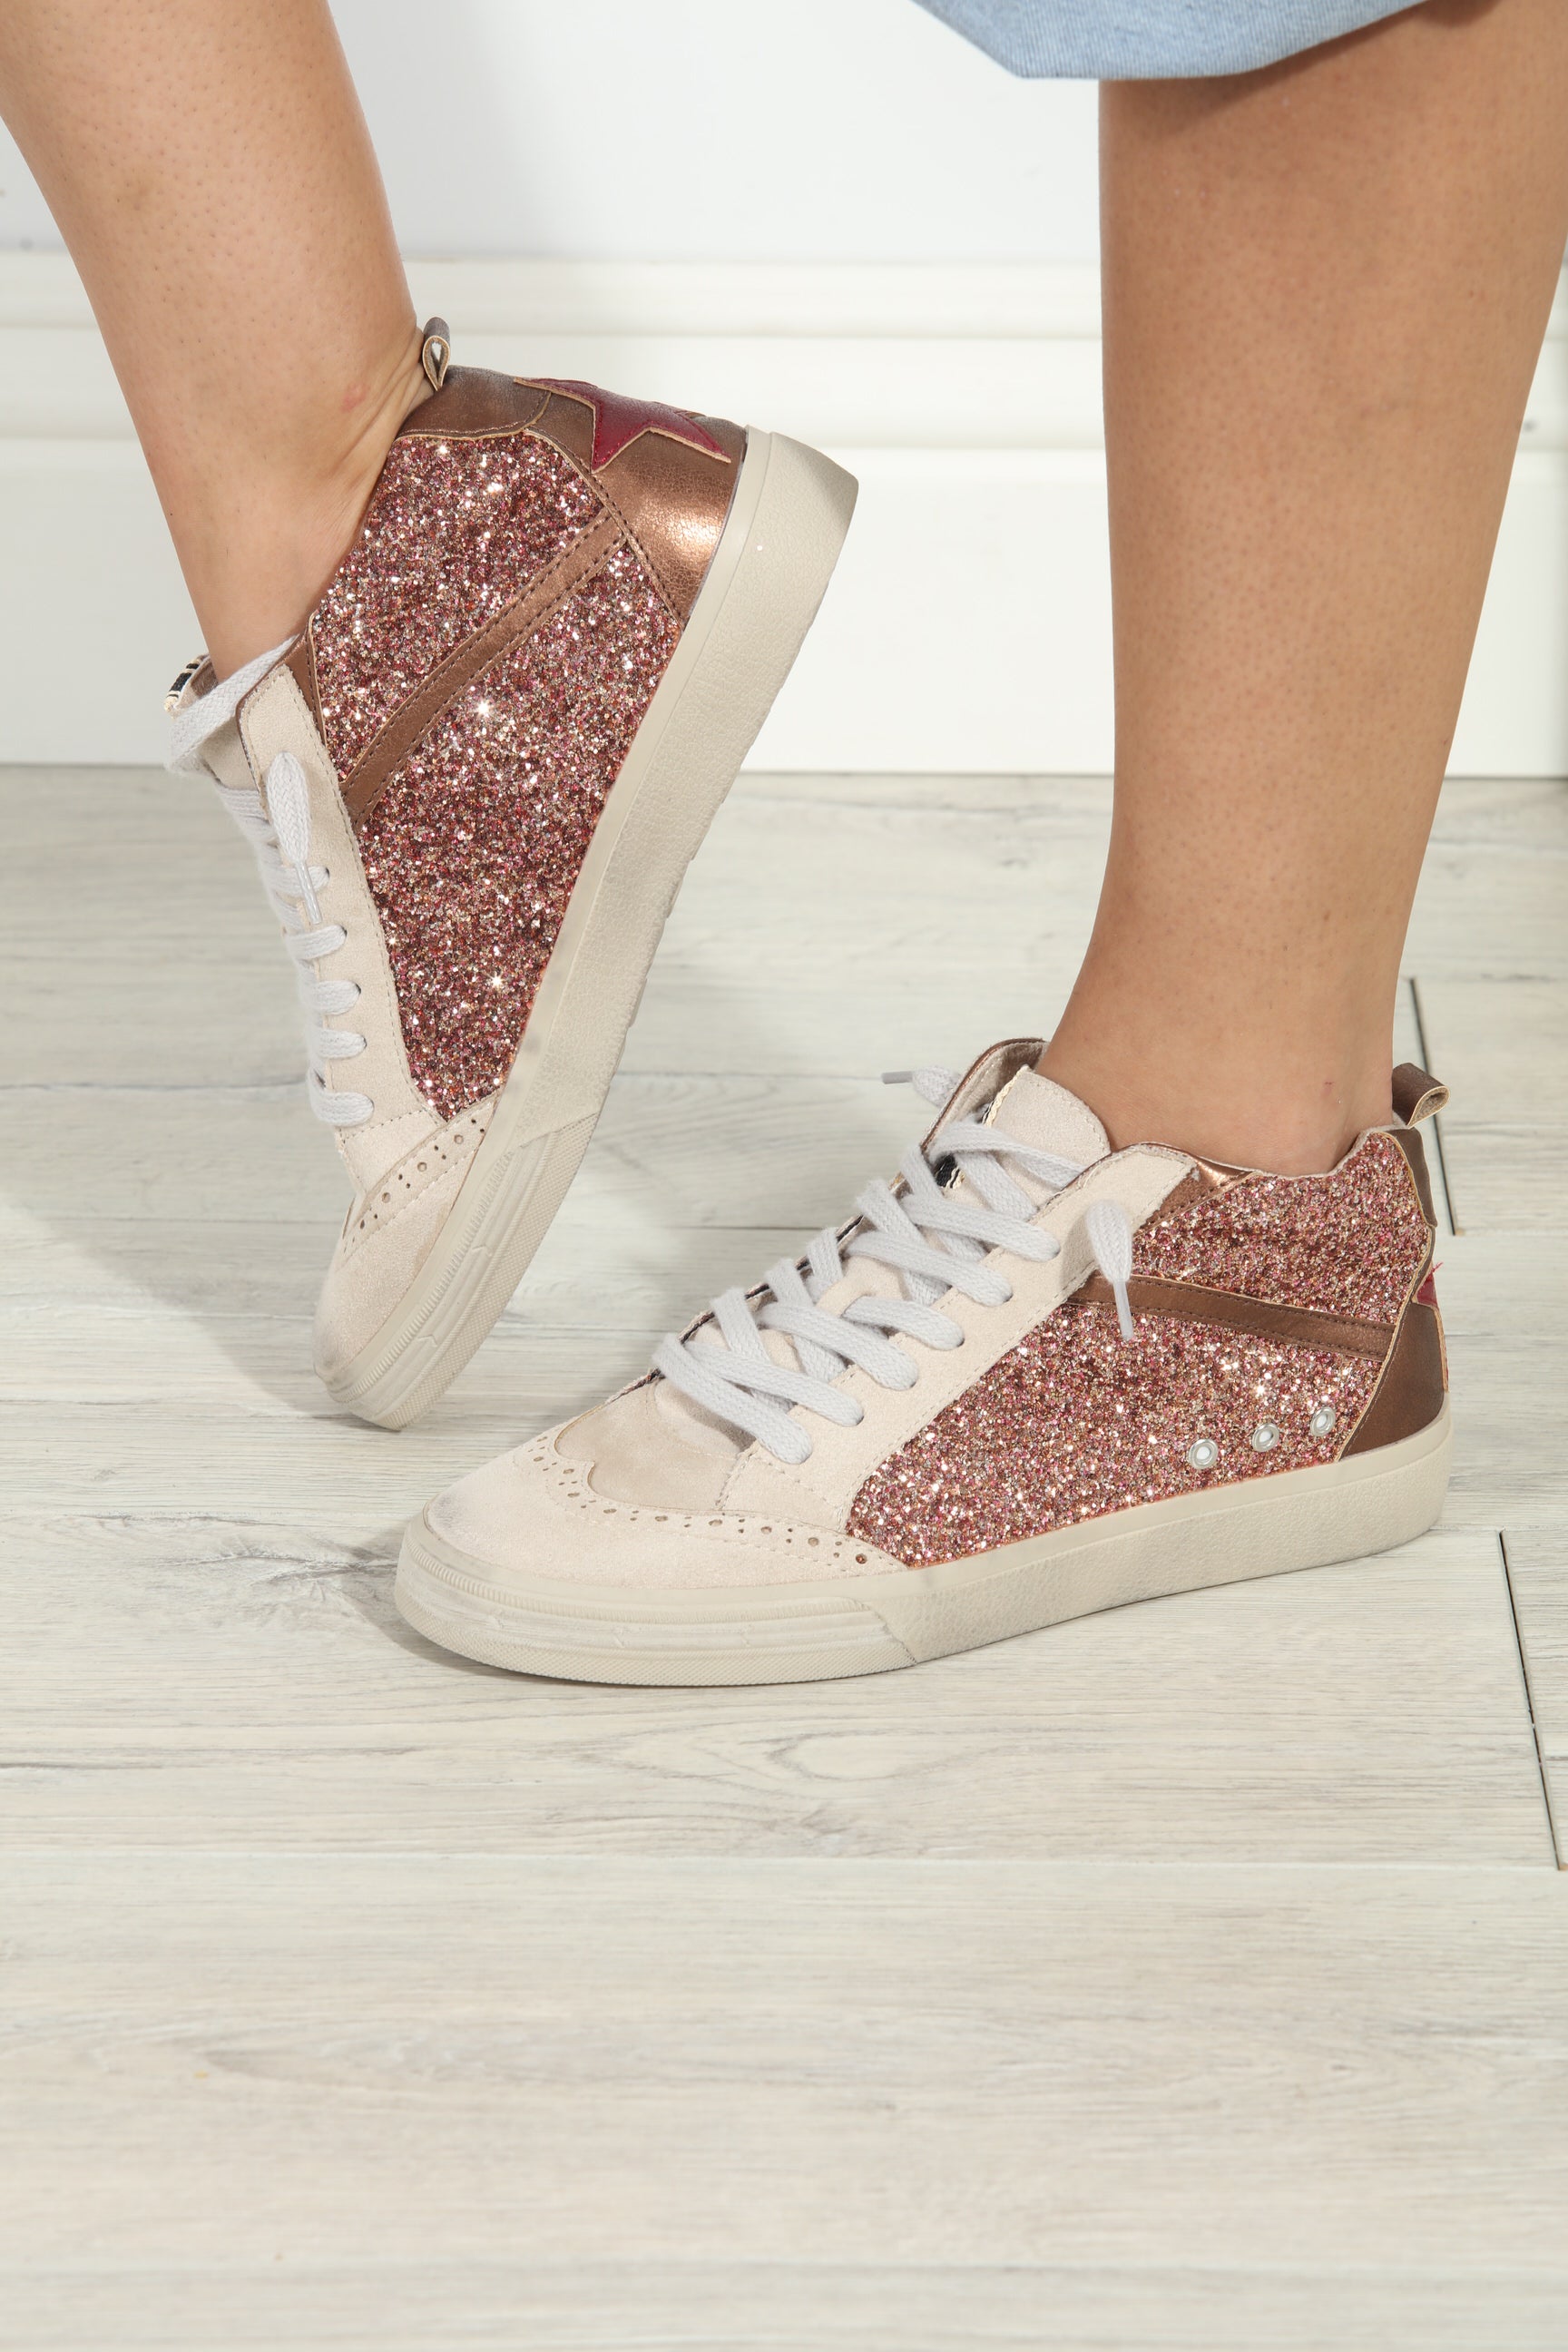 Riley Rose Gold Sparkle High-Top Sneakers-BEST SELLERS